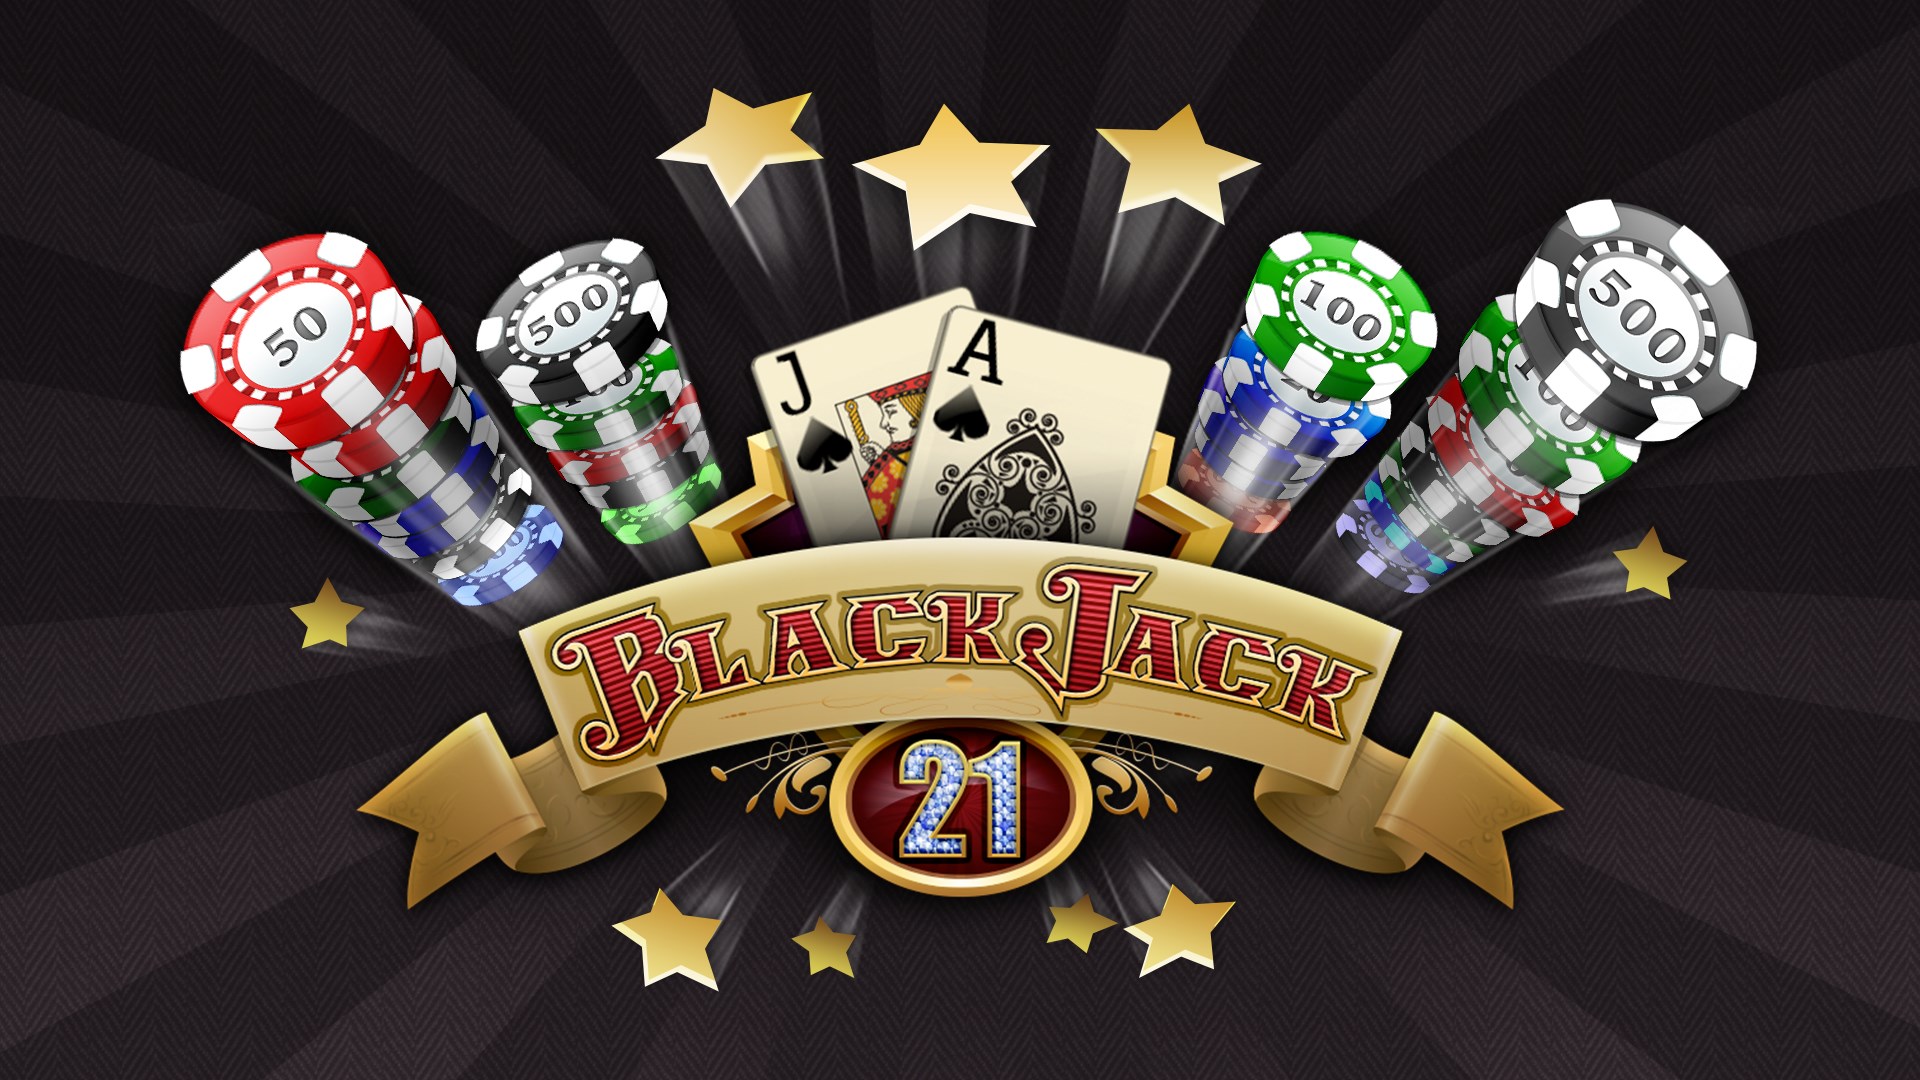 How to win consistently at blackjack